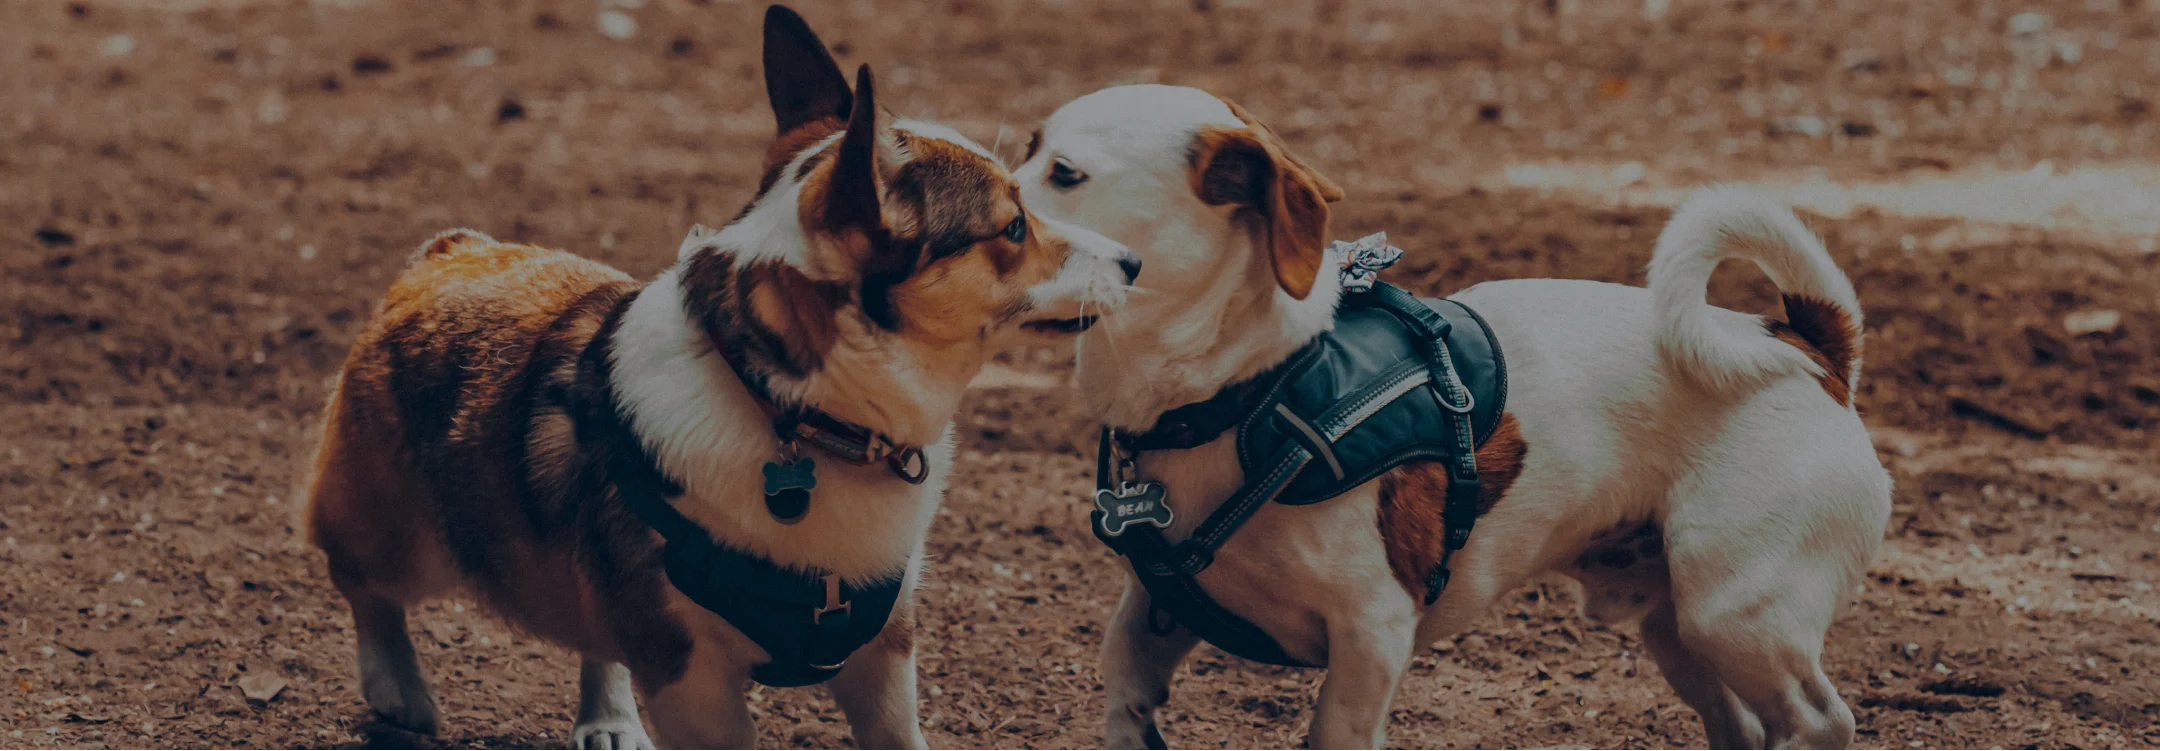 photo of two dogs nose to nose greeting each other playfully